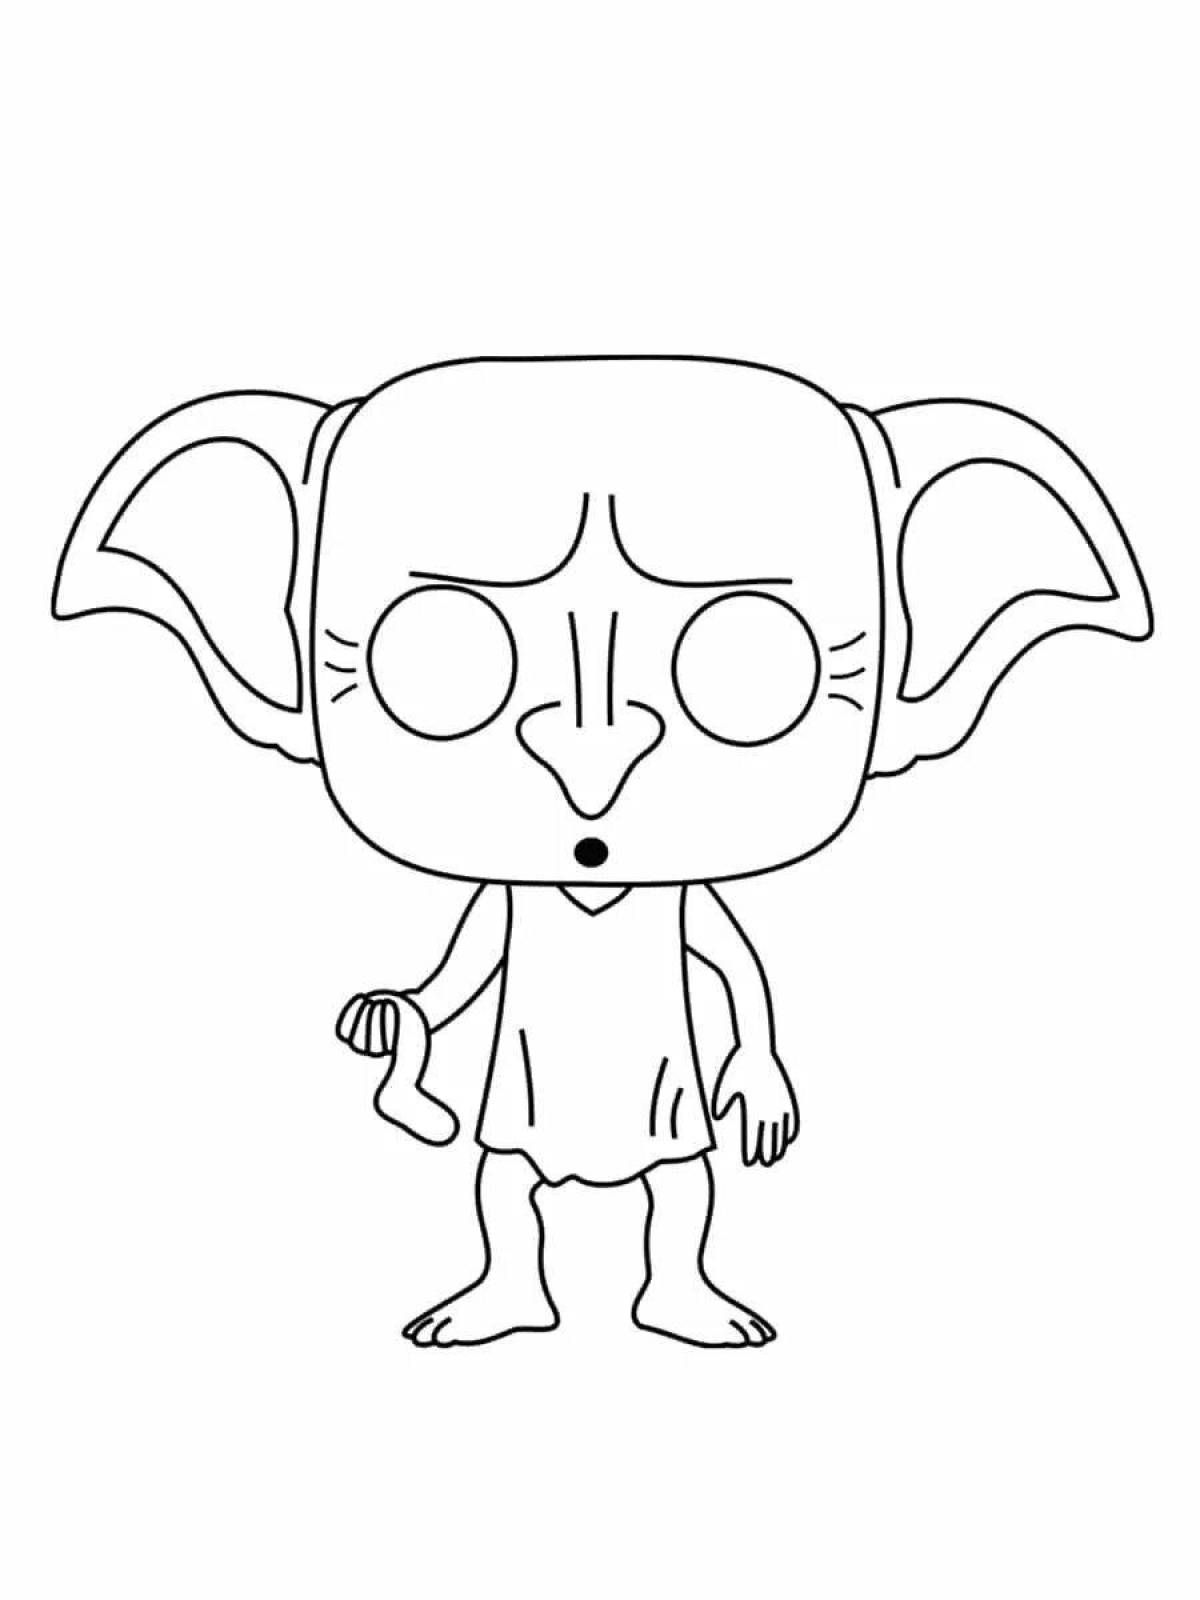 Dobby coloring page in color